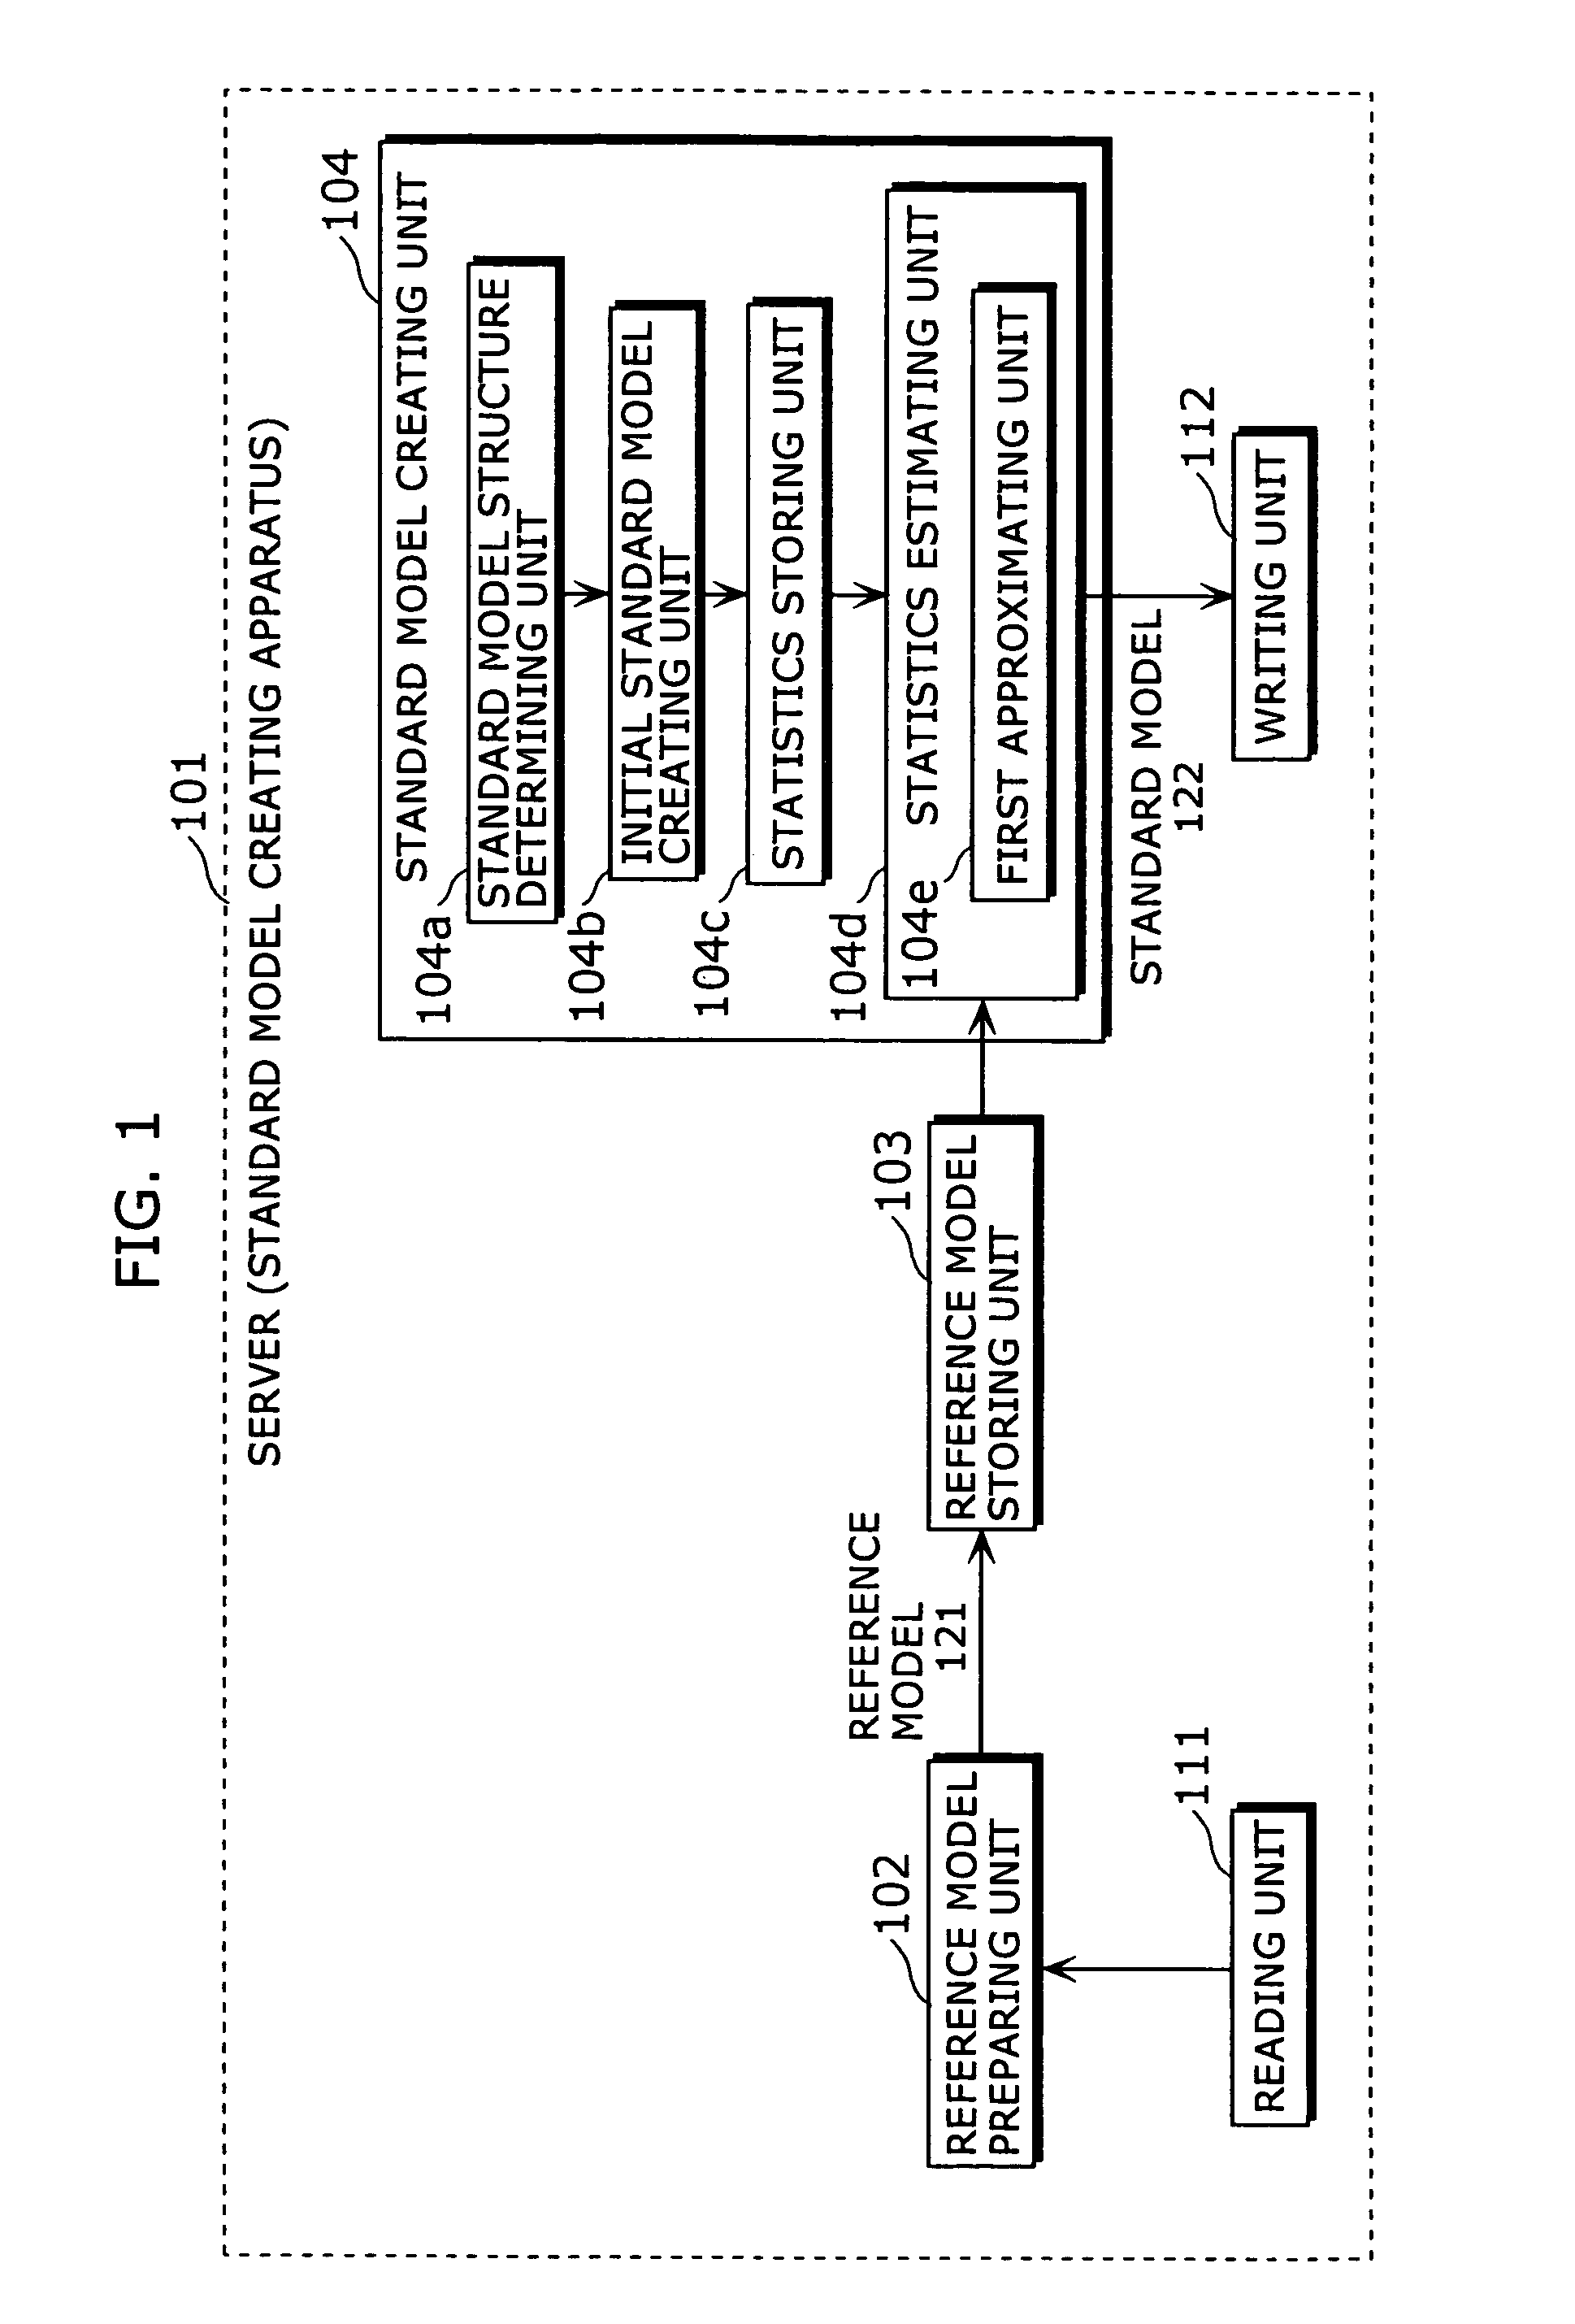 Standard-model generation for speech recognition using a reference model